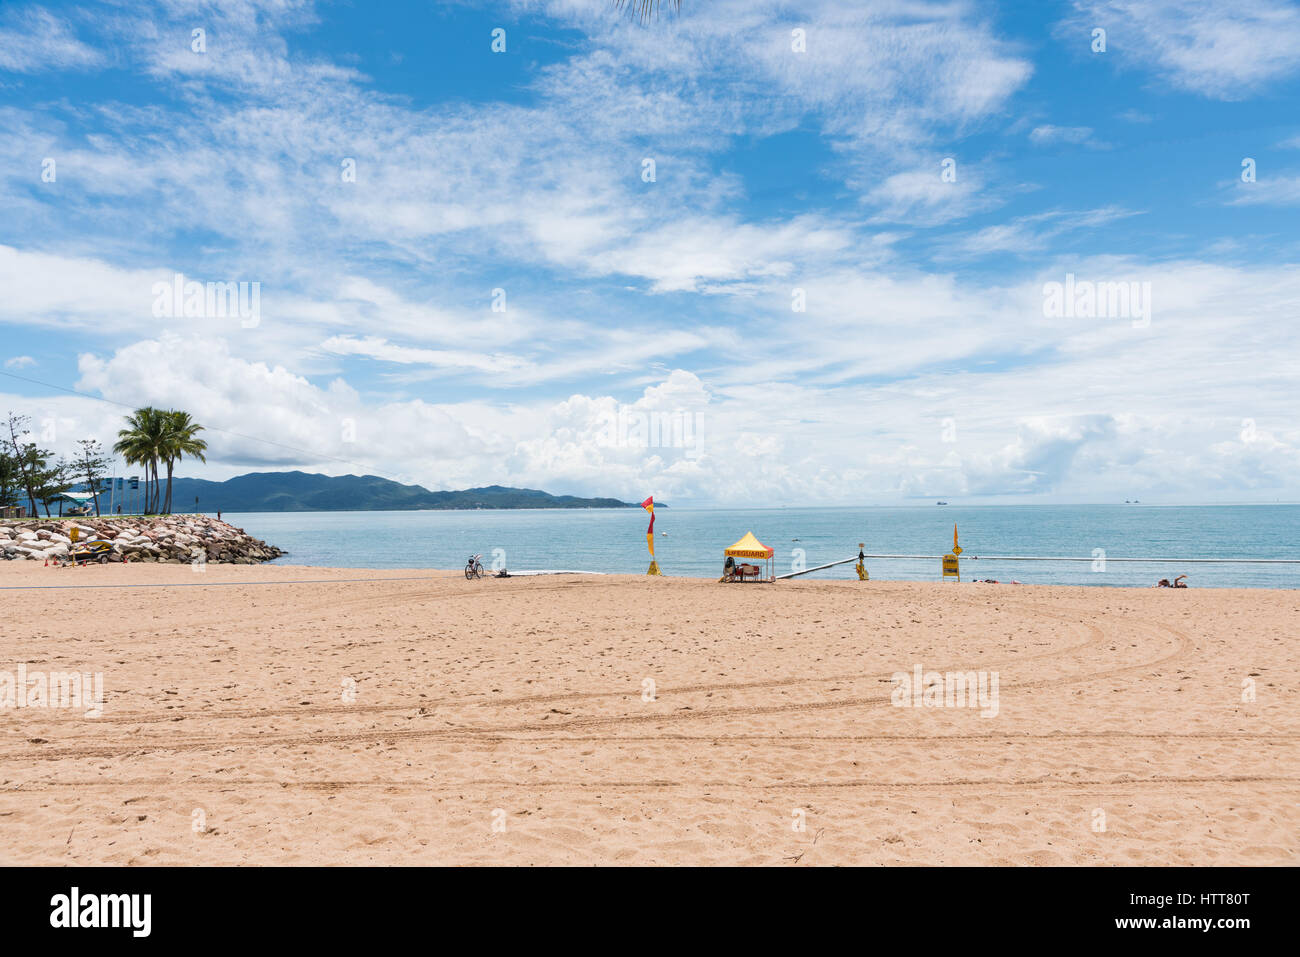 View to Magnetic Island from The Strand beach, Townsville, Australia with swimming nets Stock Photo